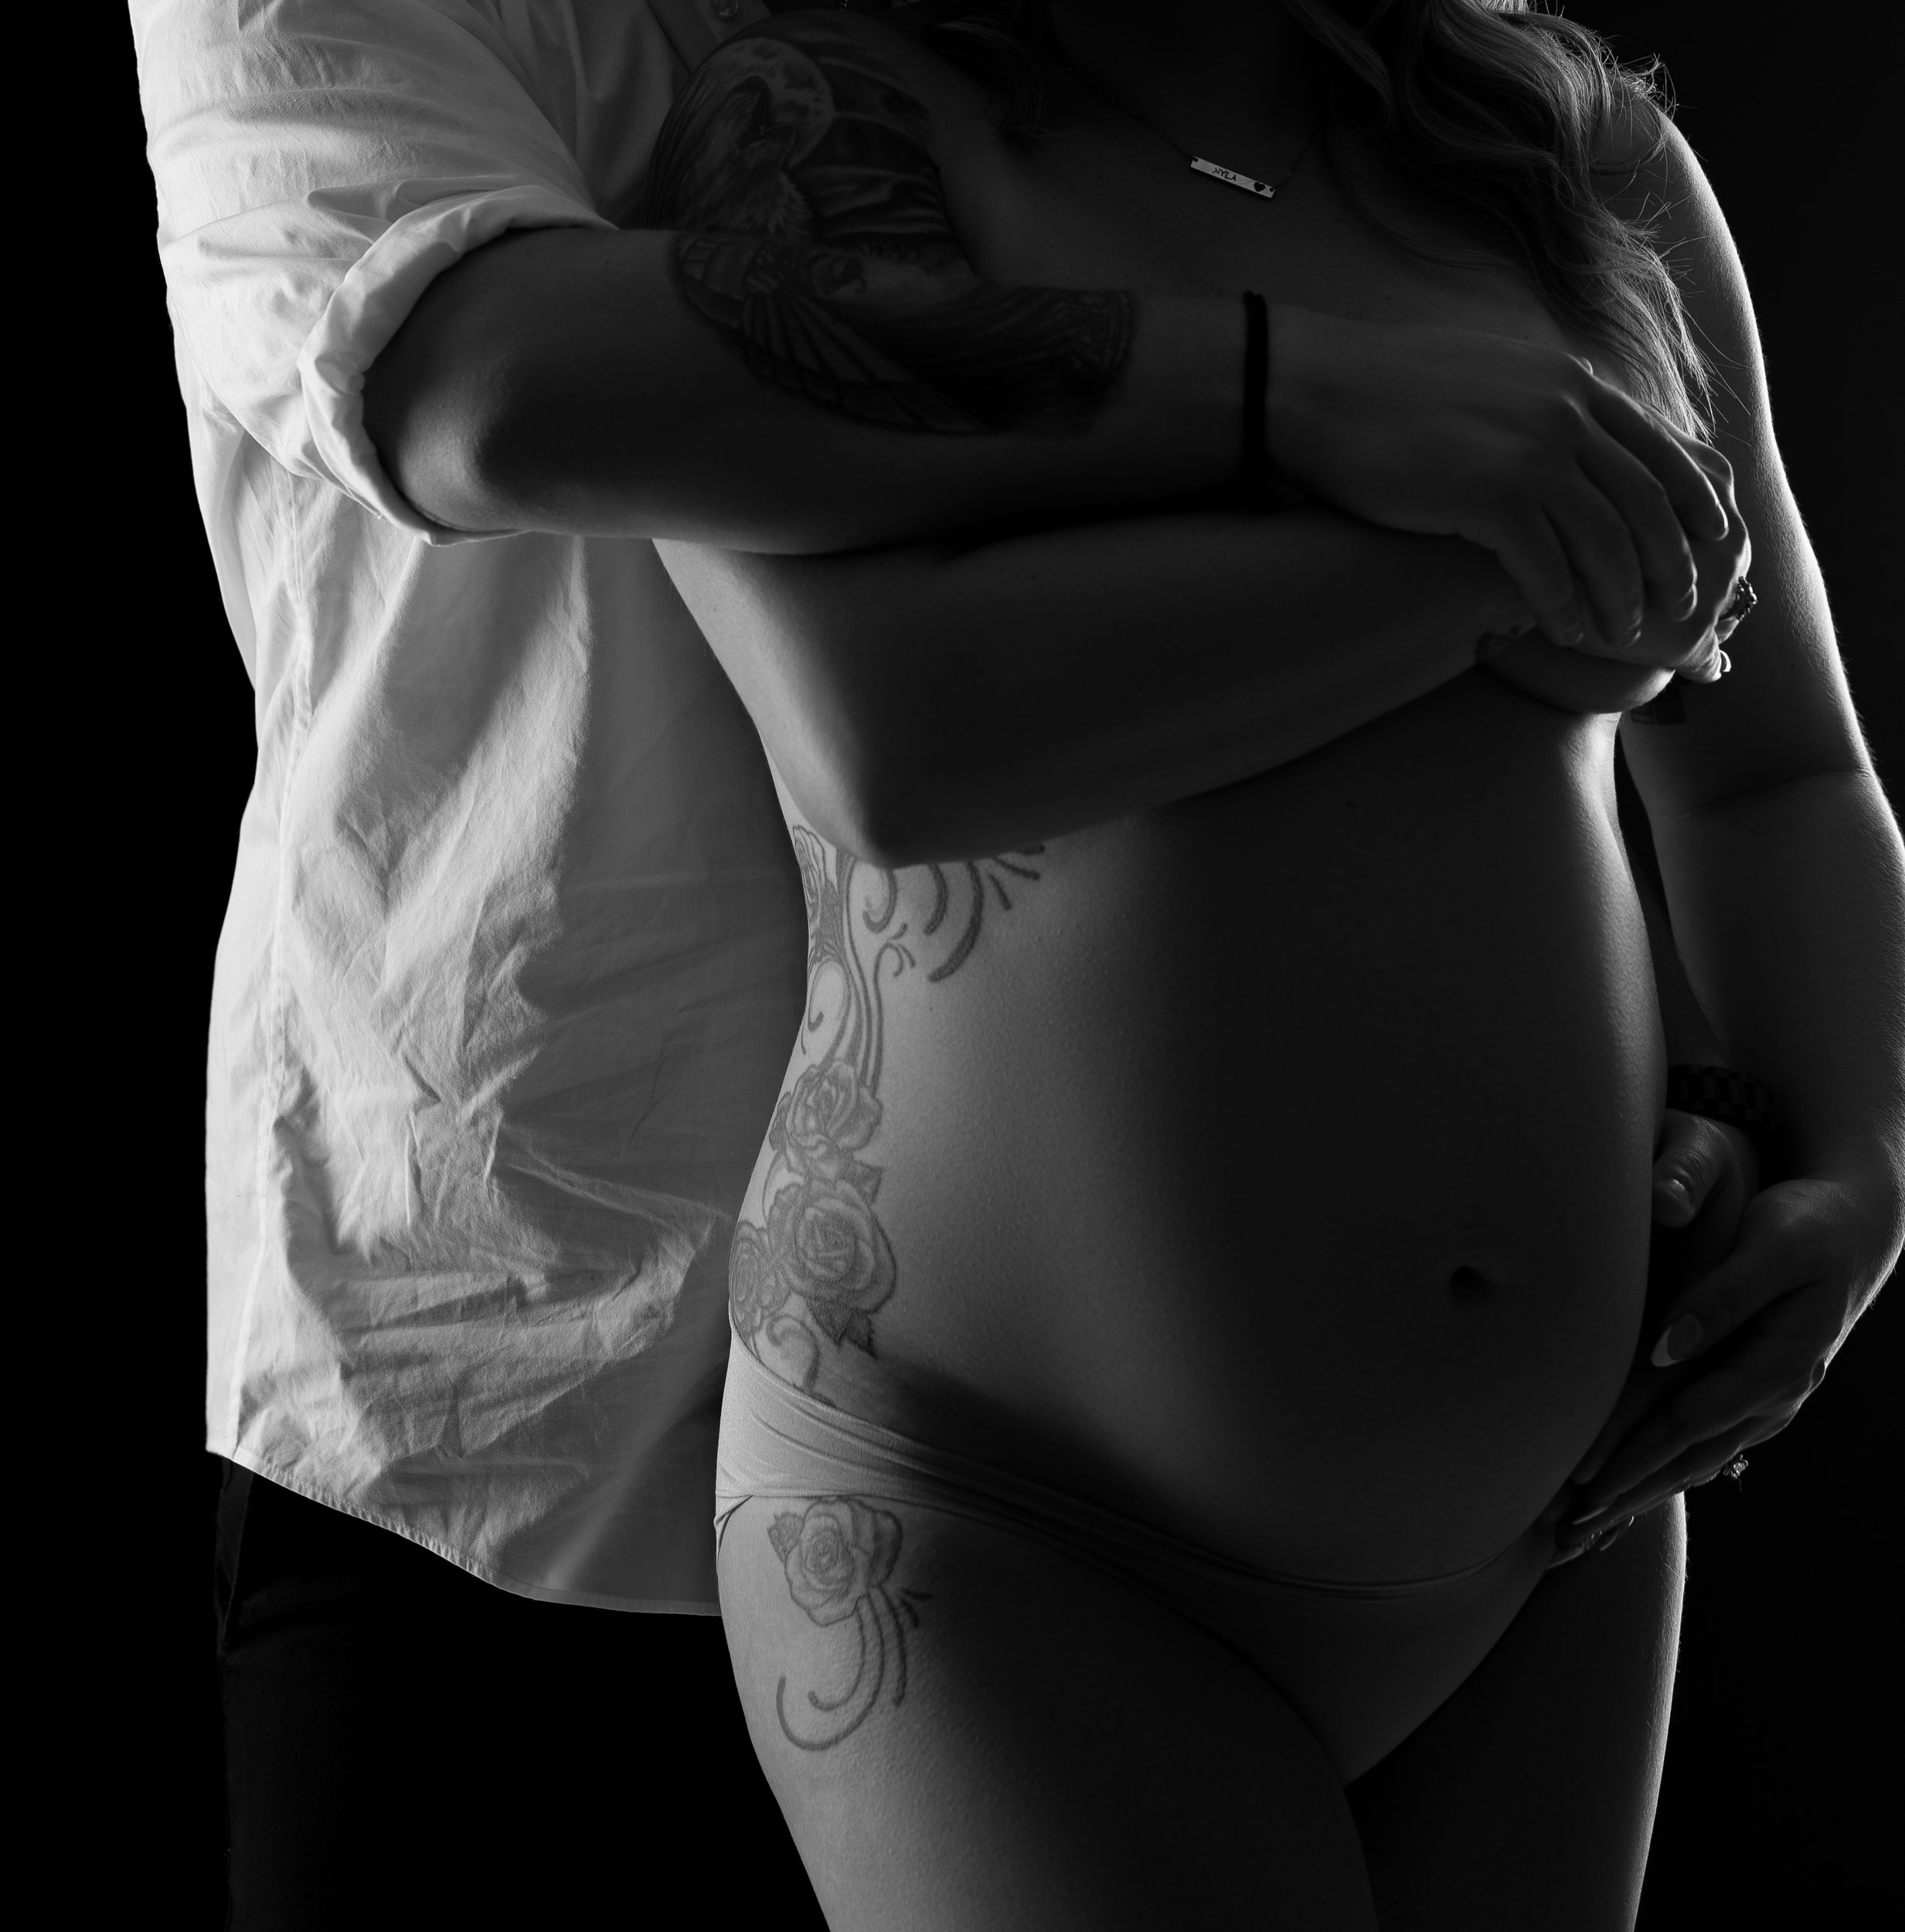 wife-and-husband-embracing-baby-bump-together-in-black-and-white-bodyscape.jpg